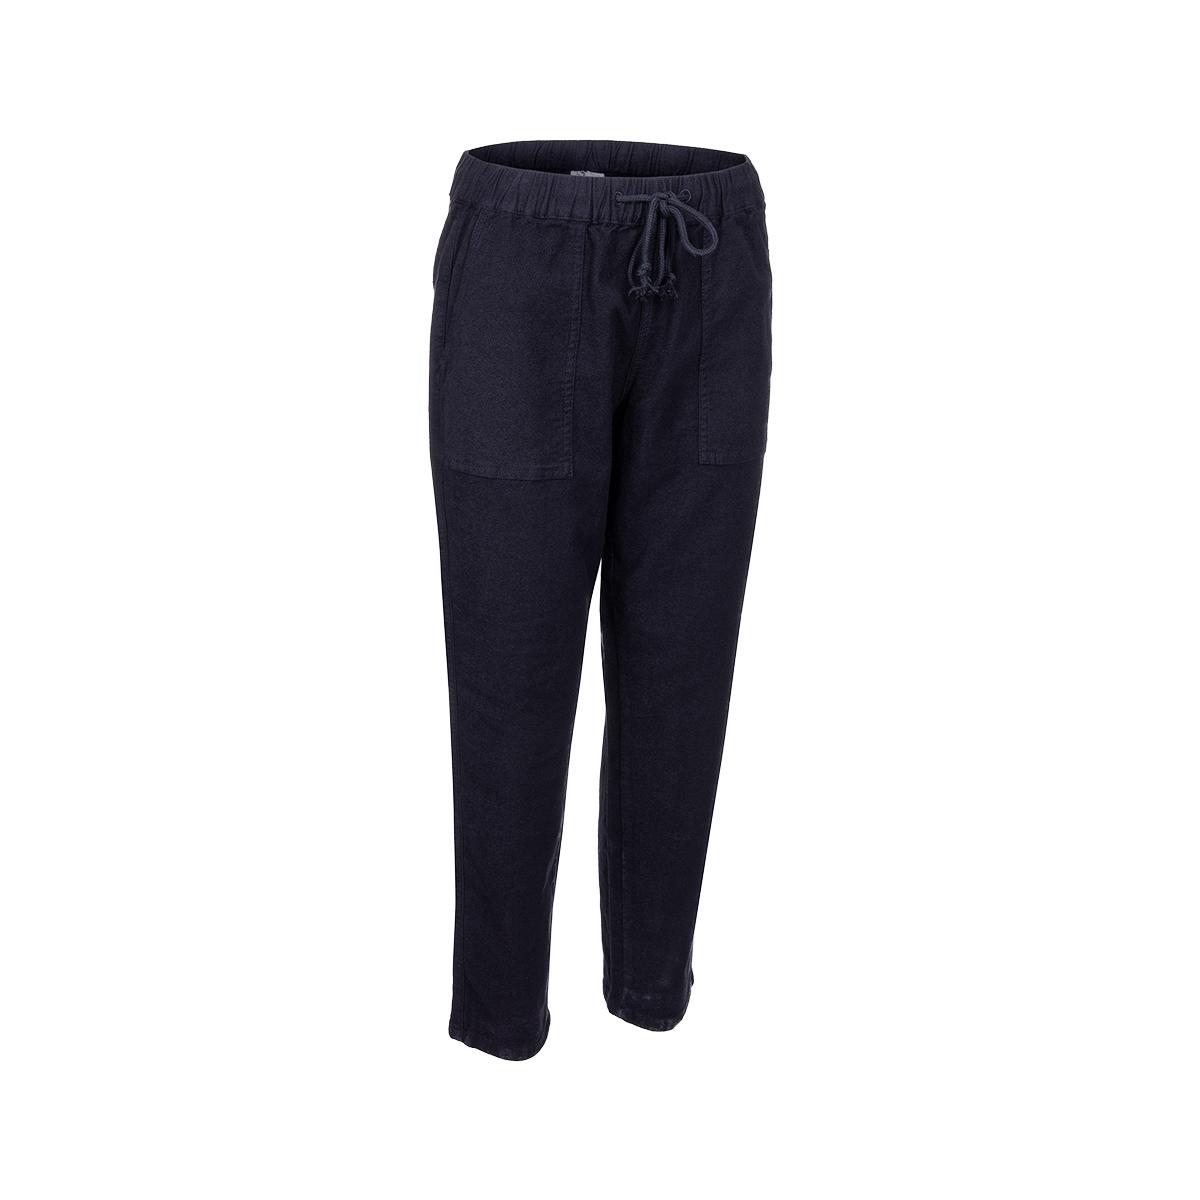  Women's Inside Out French Terry Pants